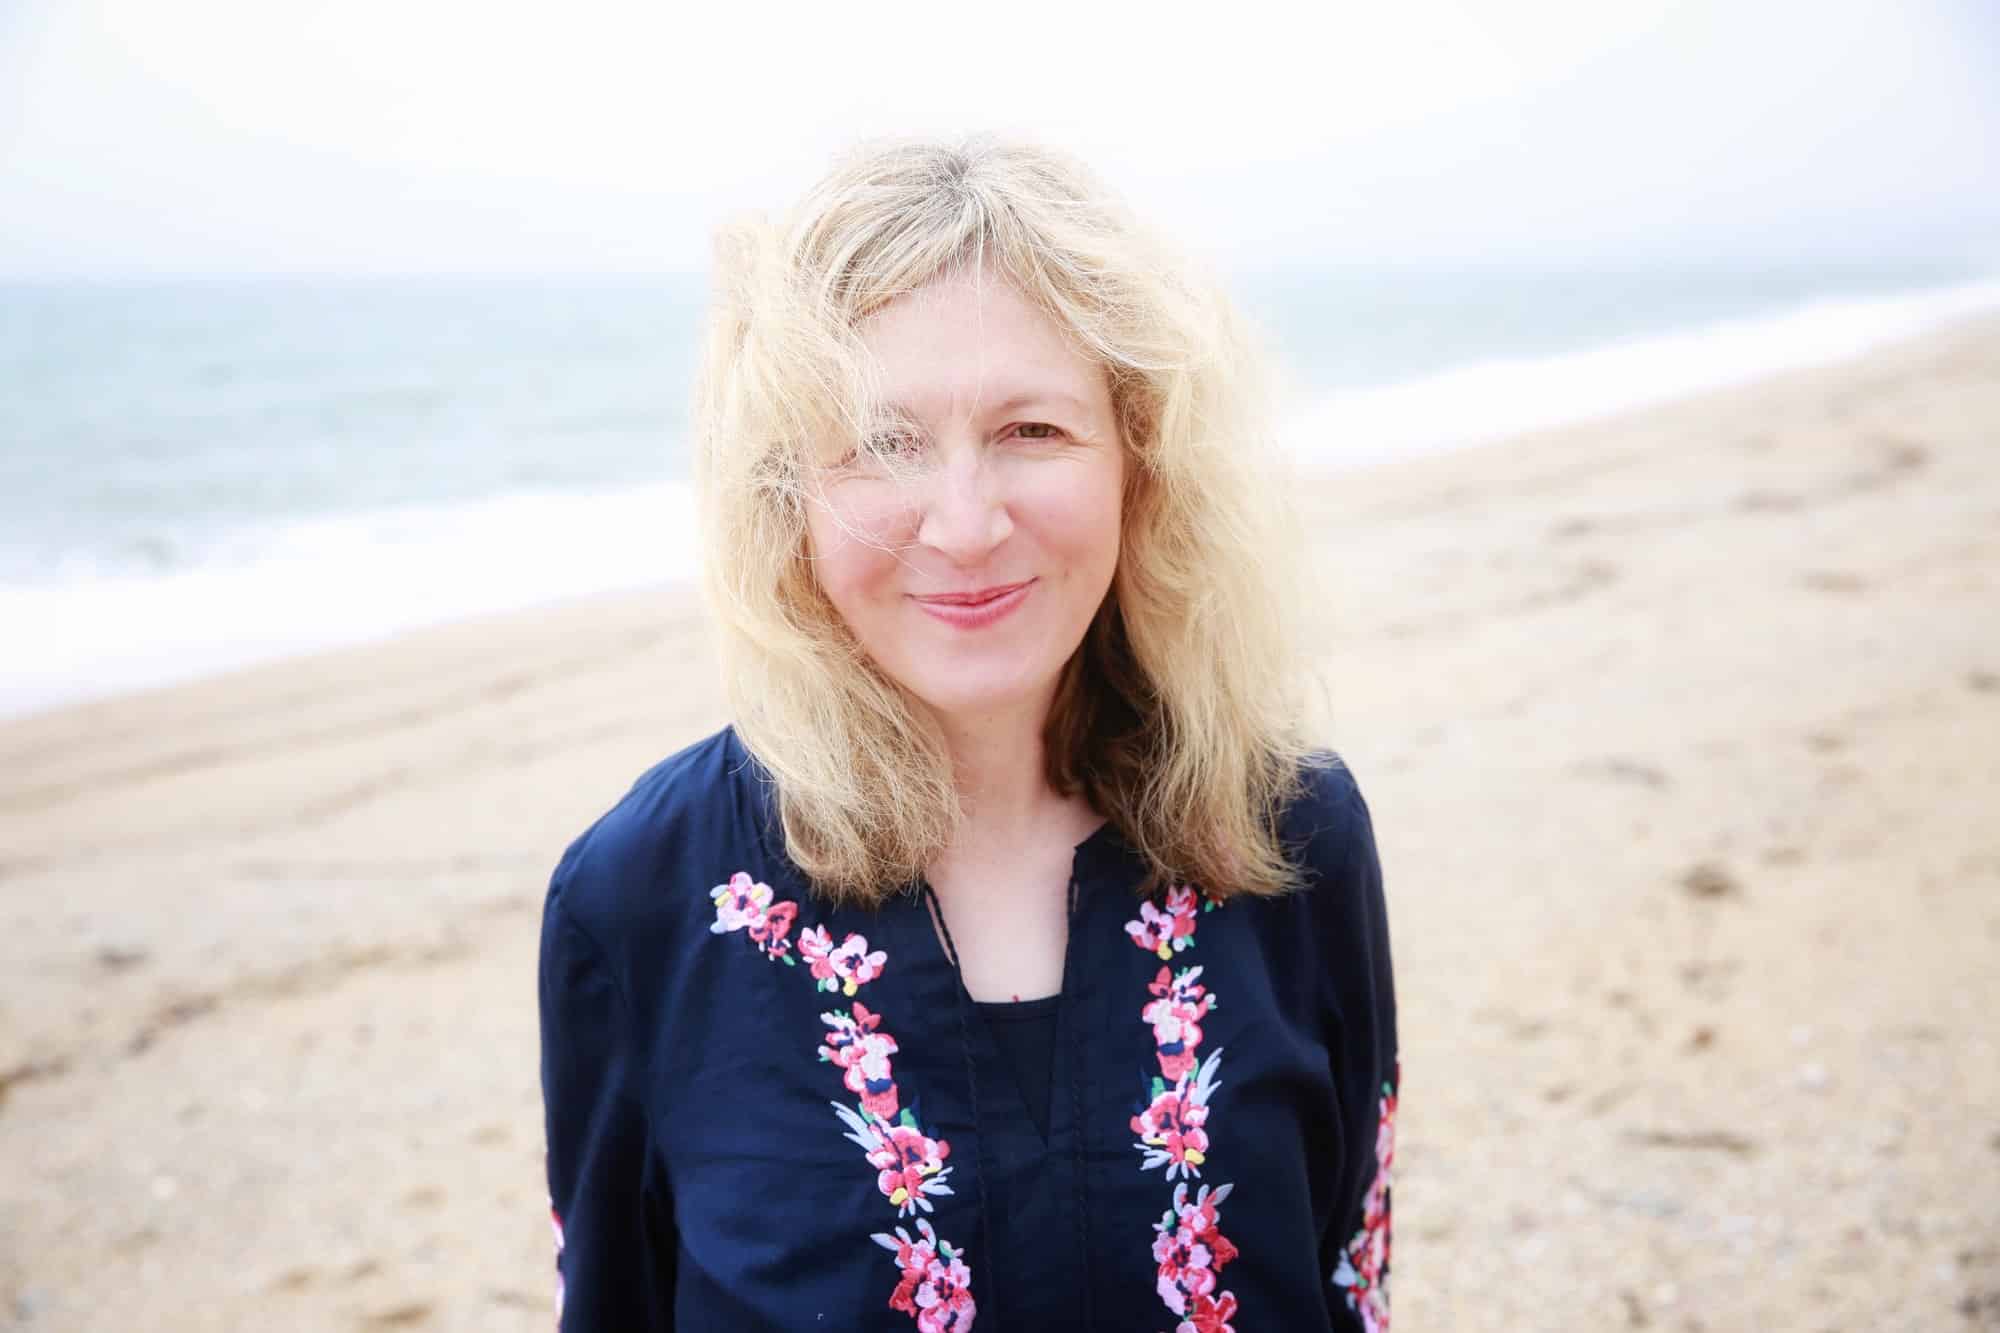 A happy and smiling 40 year old woman on a sandy beach in a wellbeing concept portrait